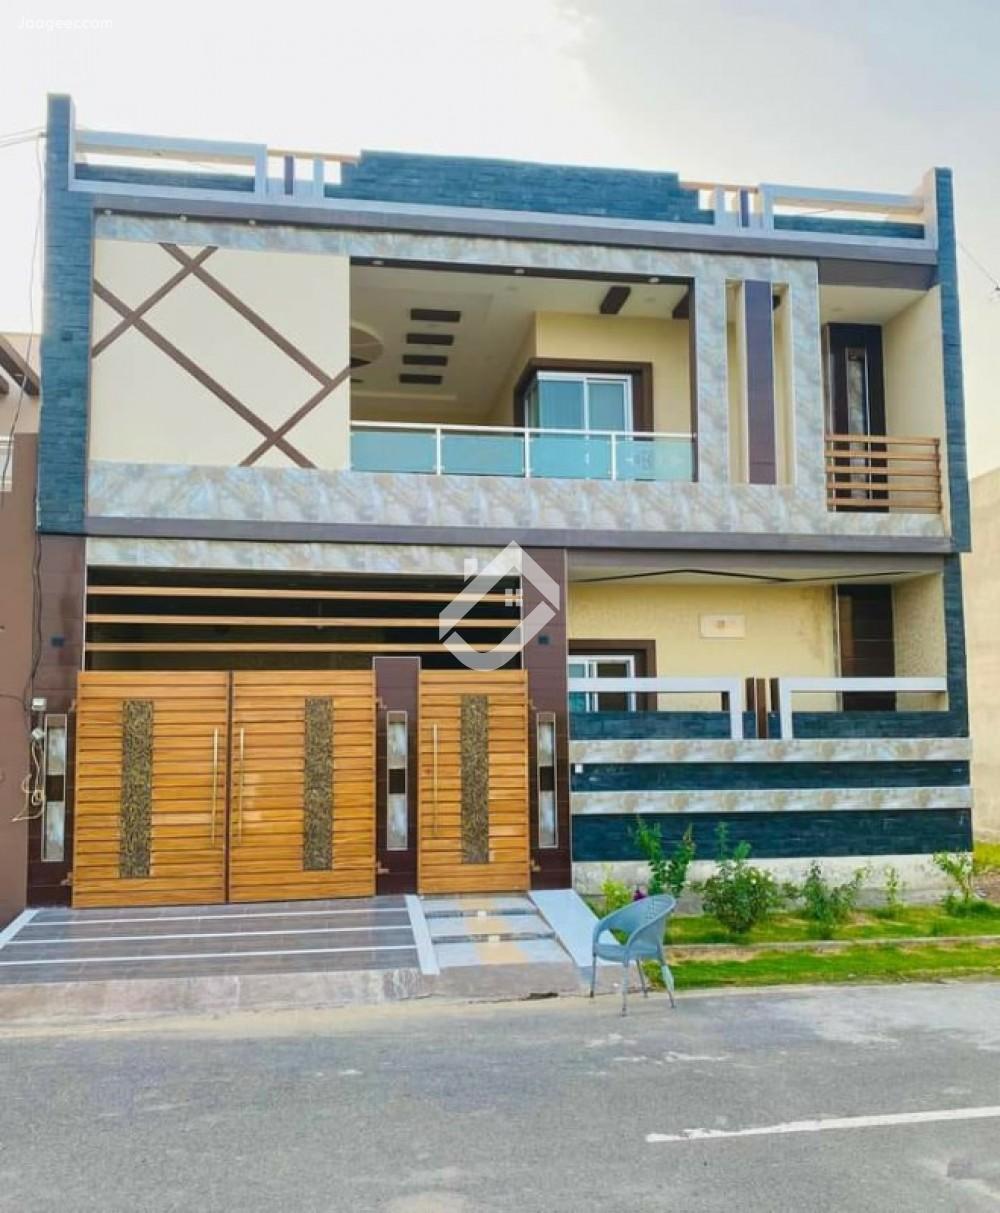 Main image 9 Marla Double Storey House For Sale In Life City Phase 1 Life City, Bhalwal